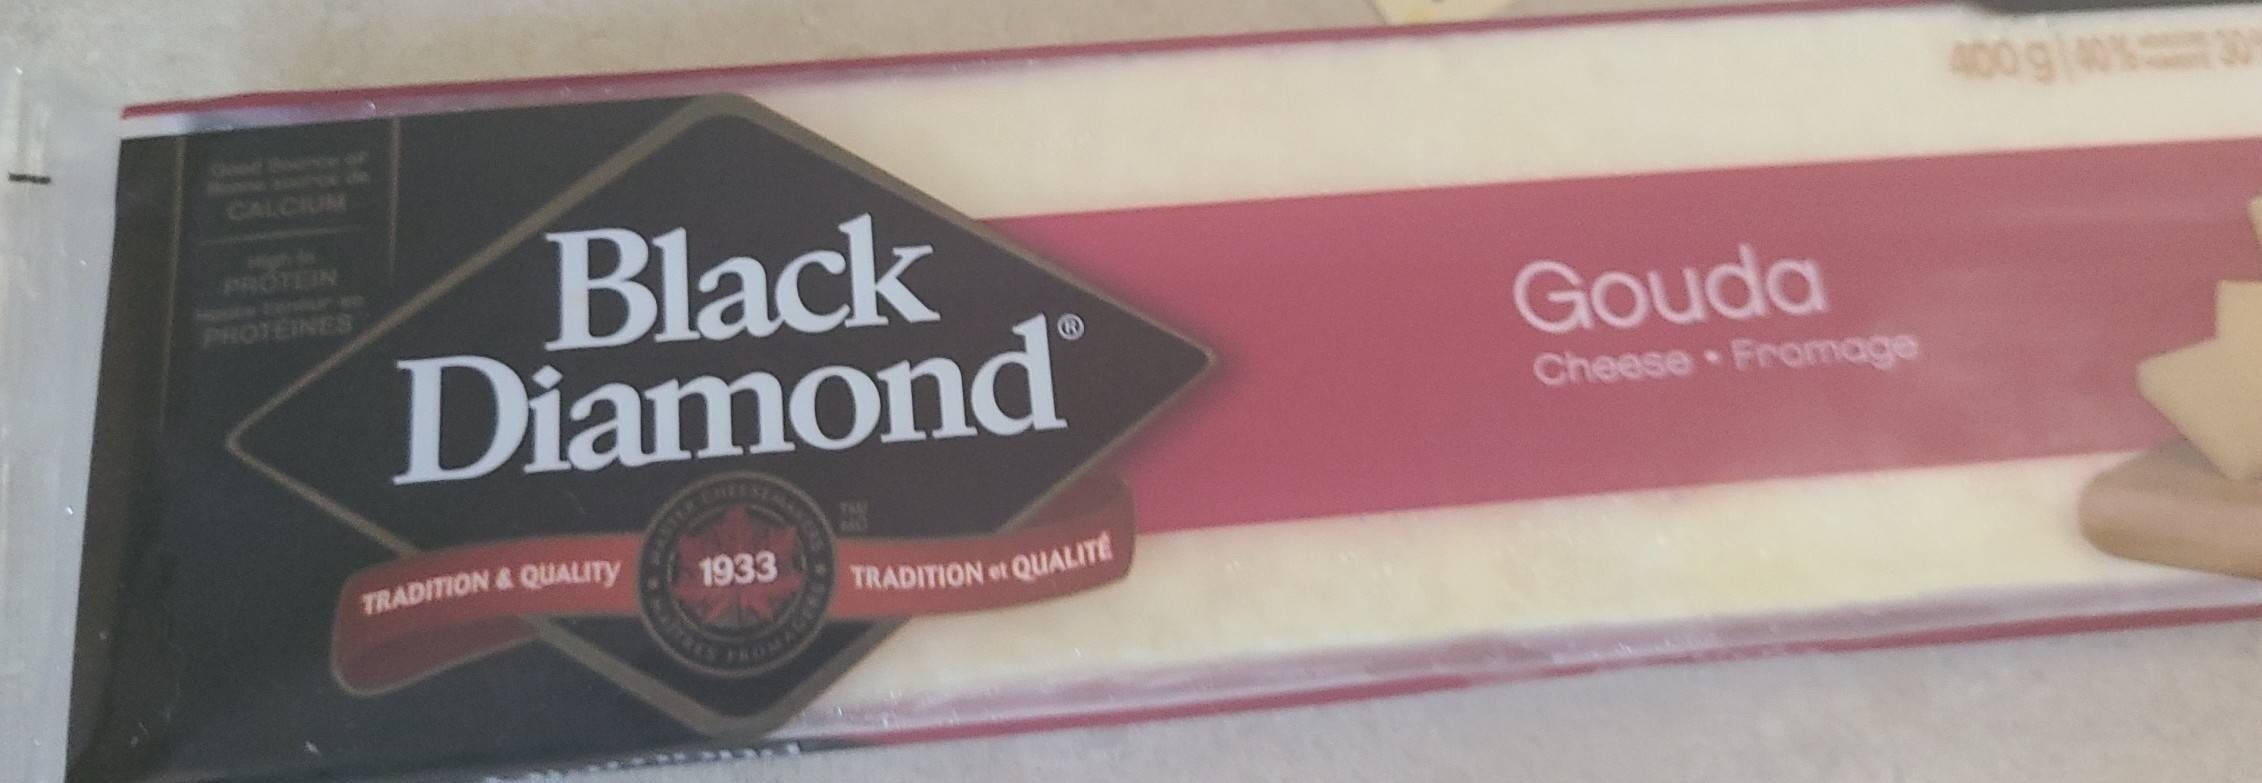 Gouda cheese - Product - fr